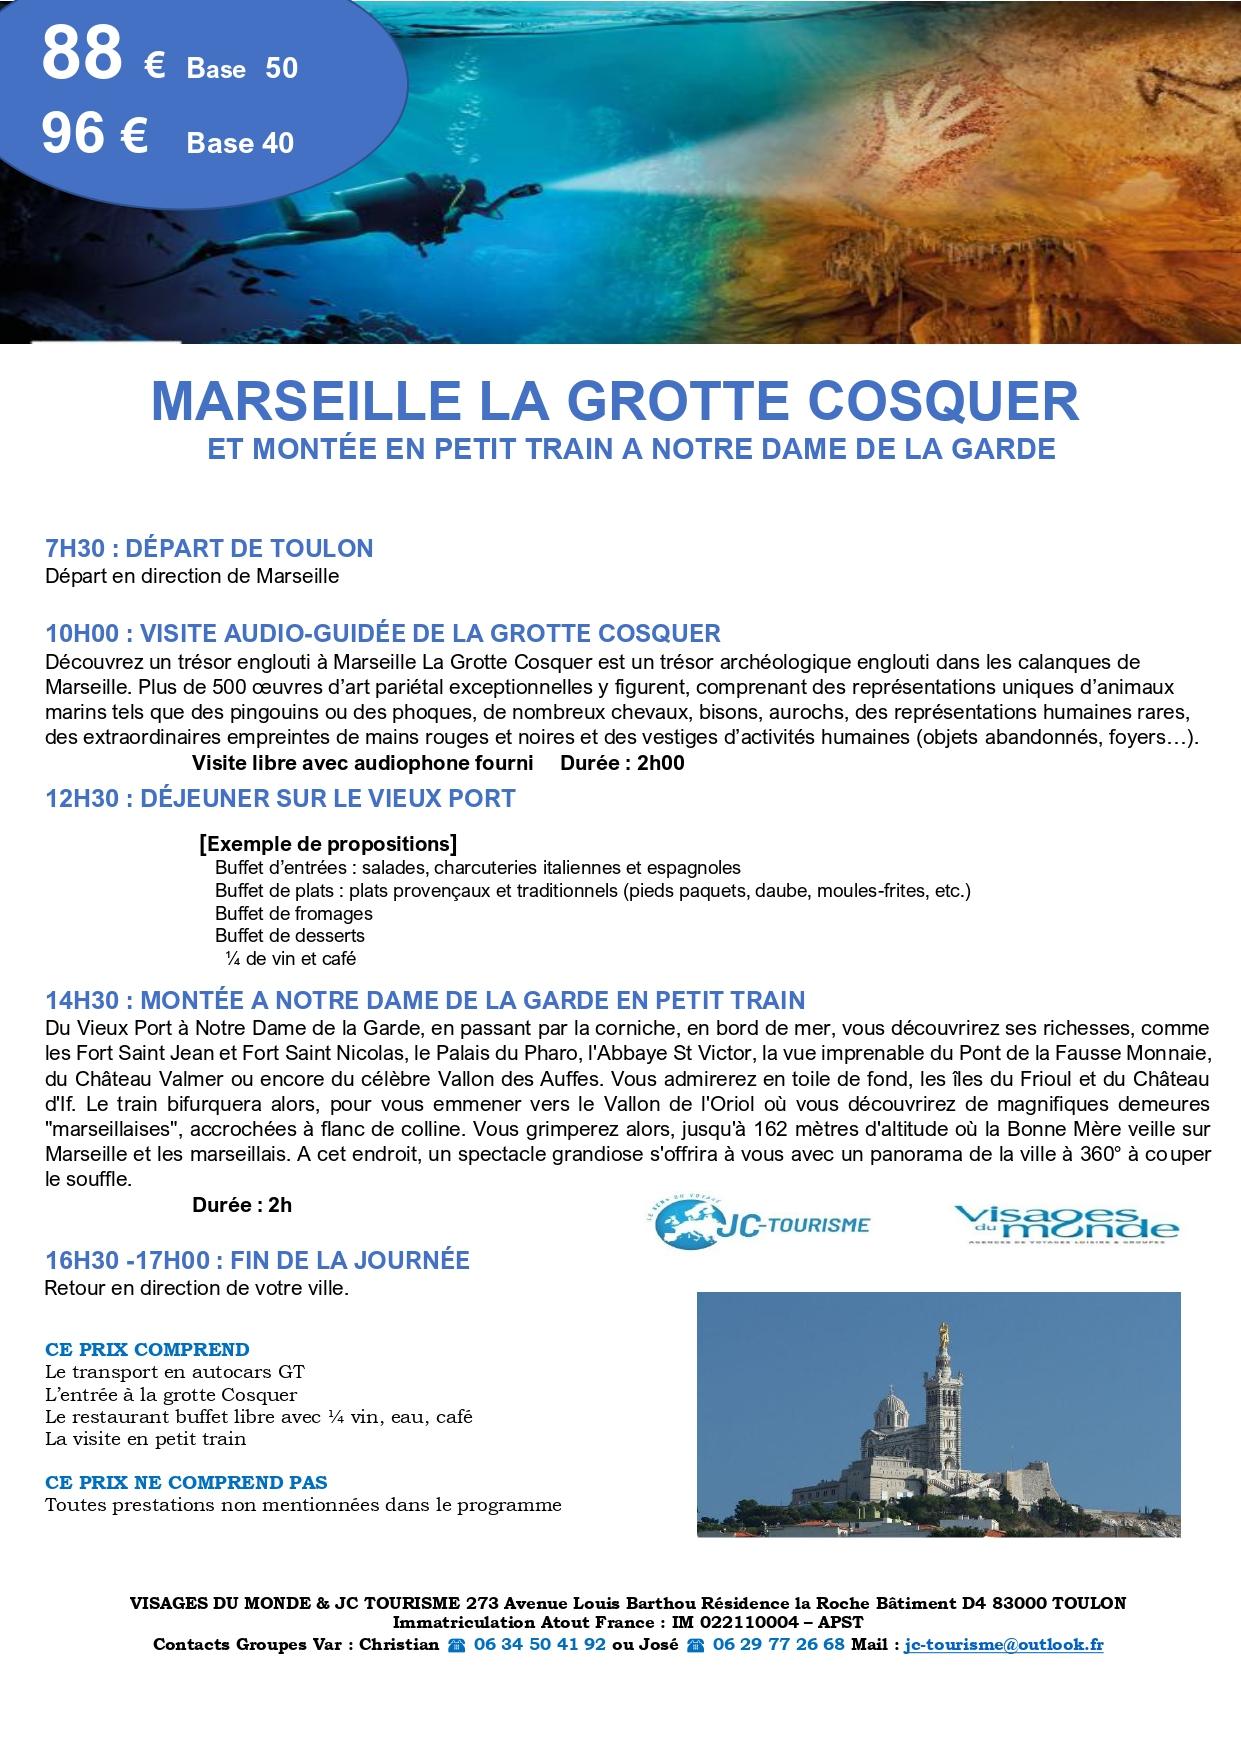 Grotte cosquer a marseille page 0001